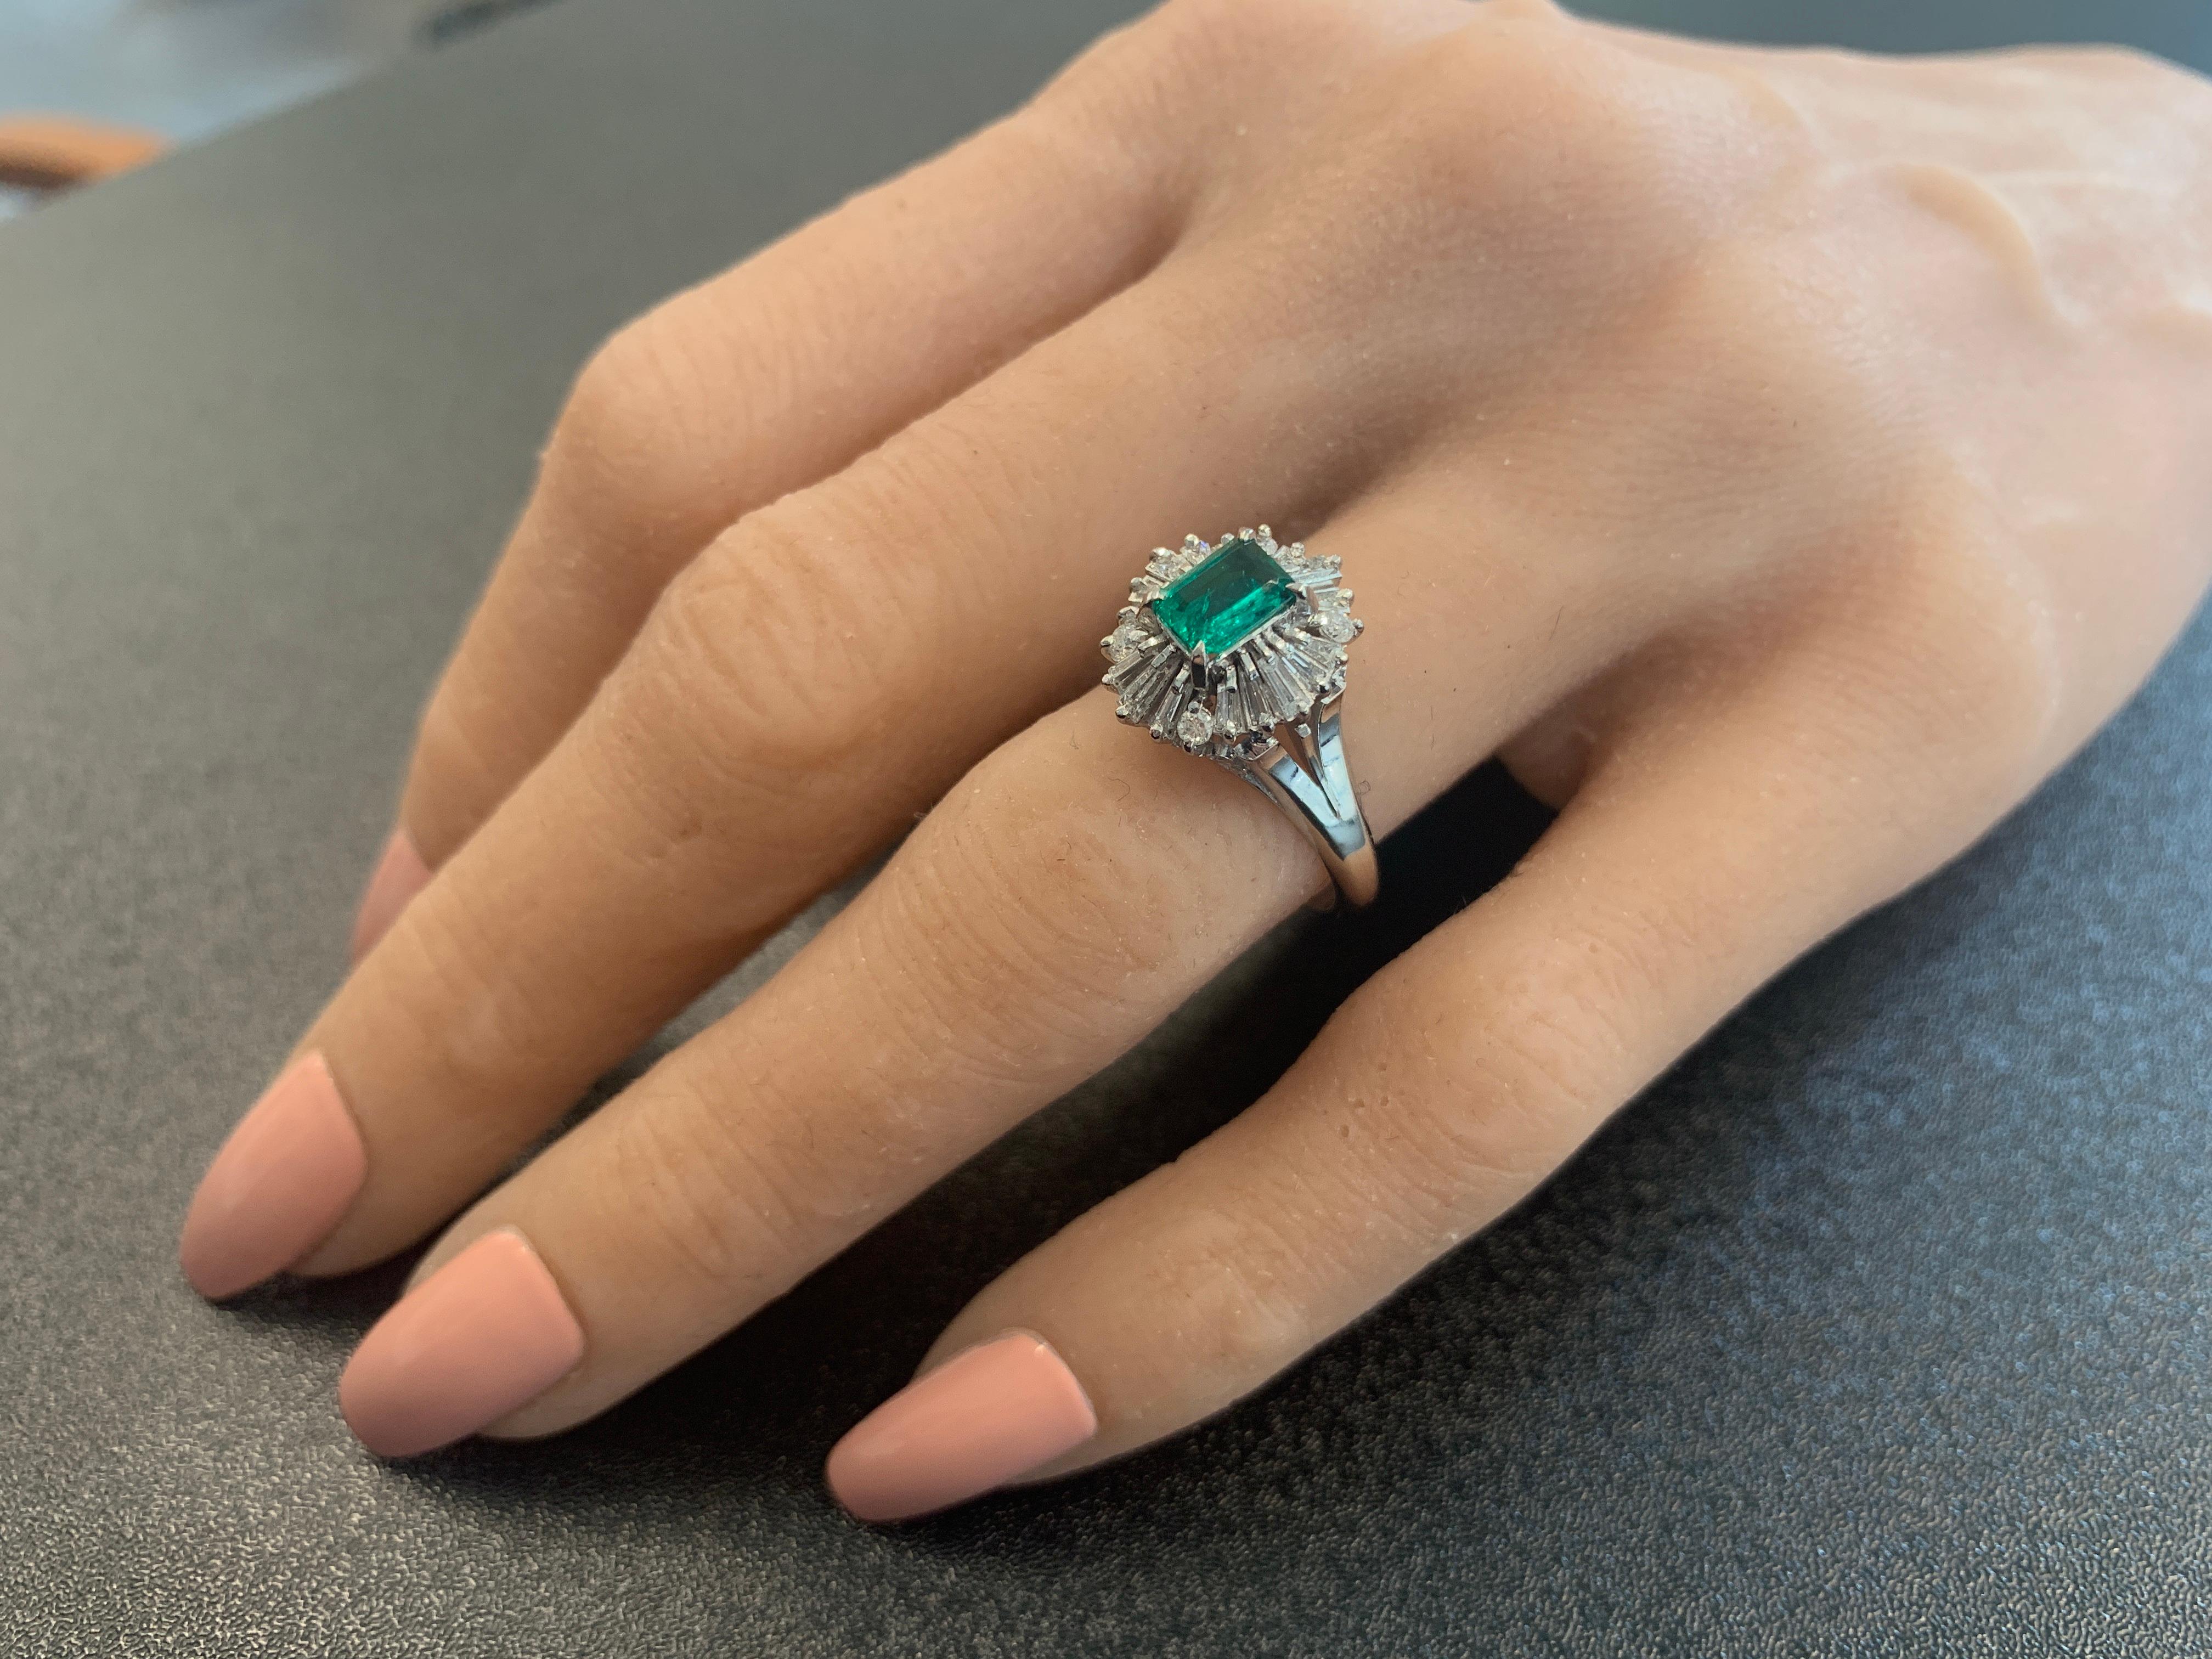 An emerald cut 0.67 carat fine quality emerald sits in the center of this brightly polished platinum ring, creating a luxurious ambiance of style and remarkable sophistication. The gem source is Colombia. The luscious color of this emerald is